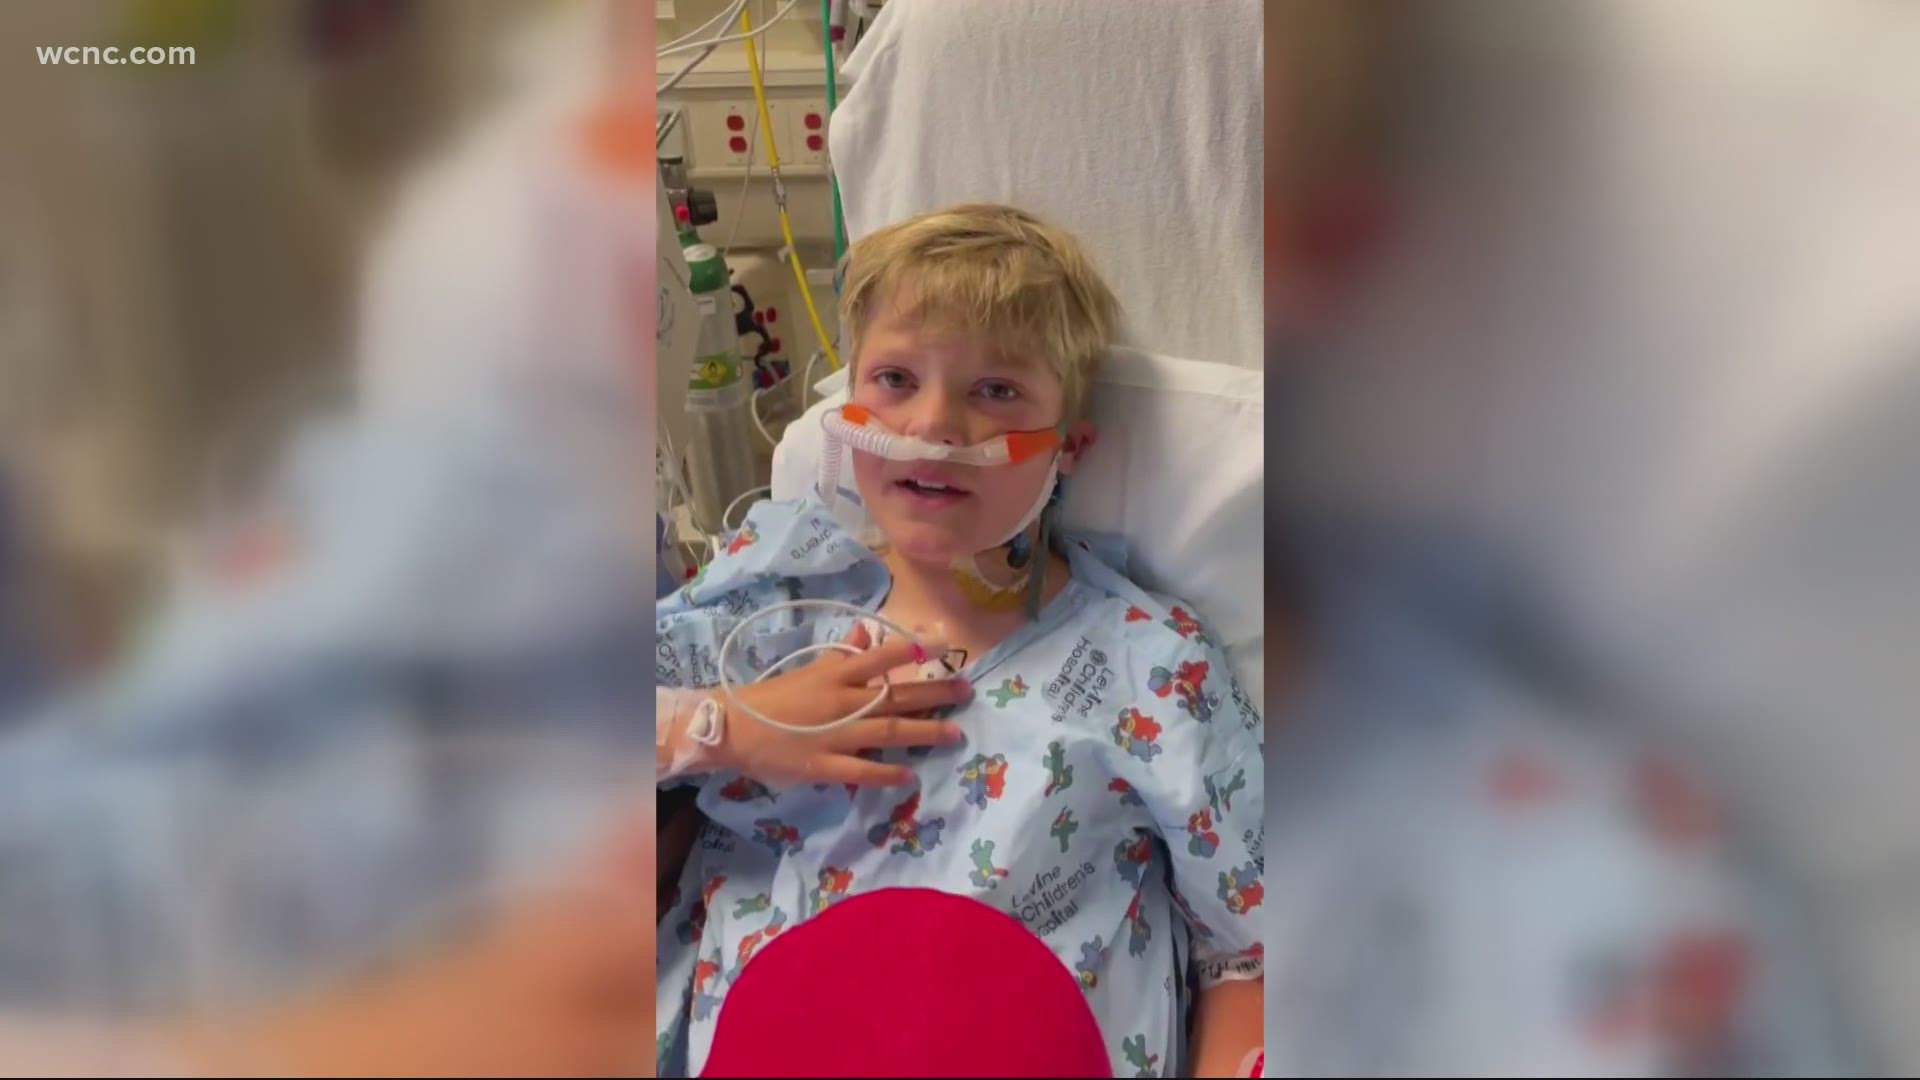 TJ Olsen underwent a heart transplant surgery last week. He was born with a congenital condition that required multiple surgeries in his young life.